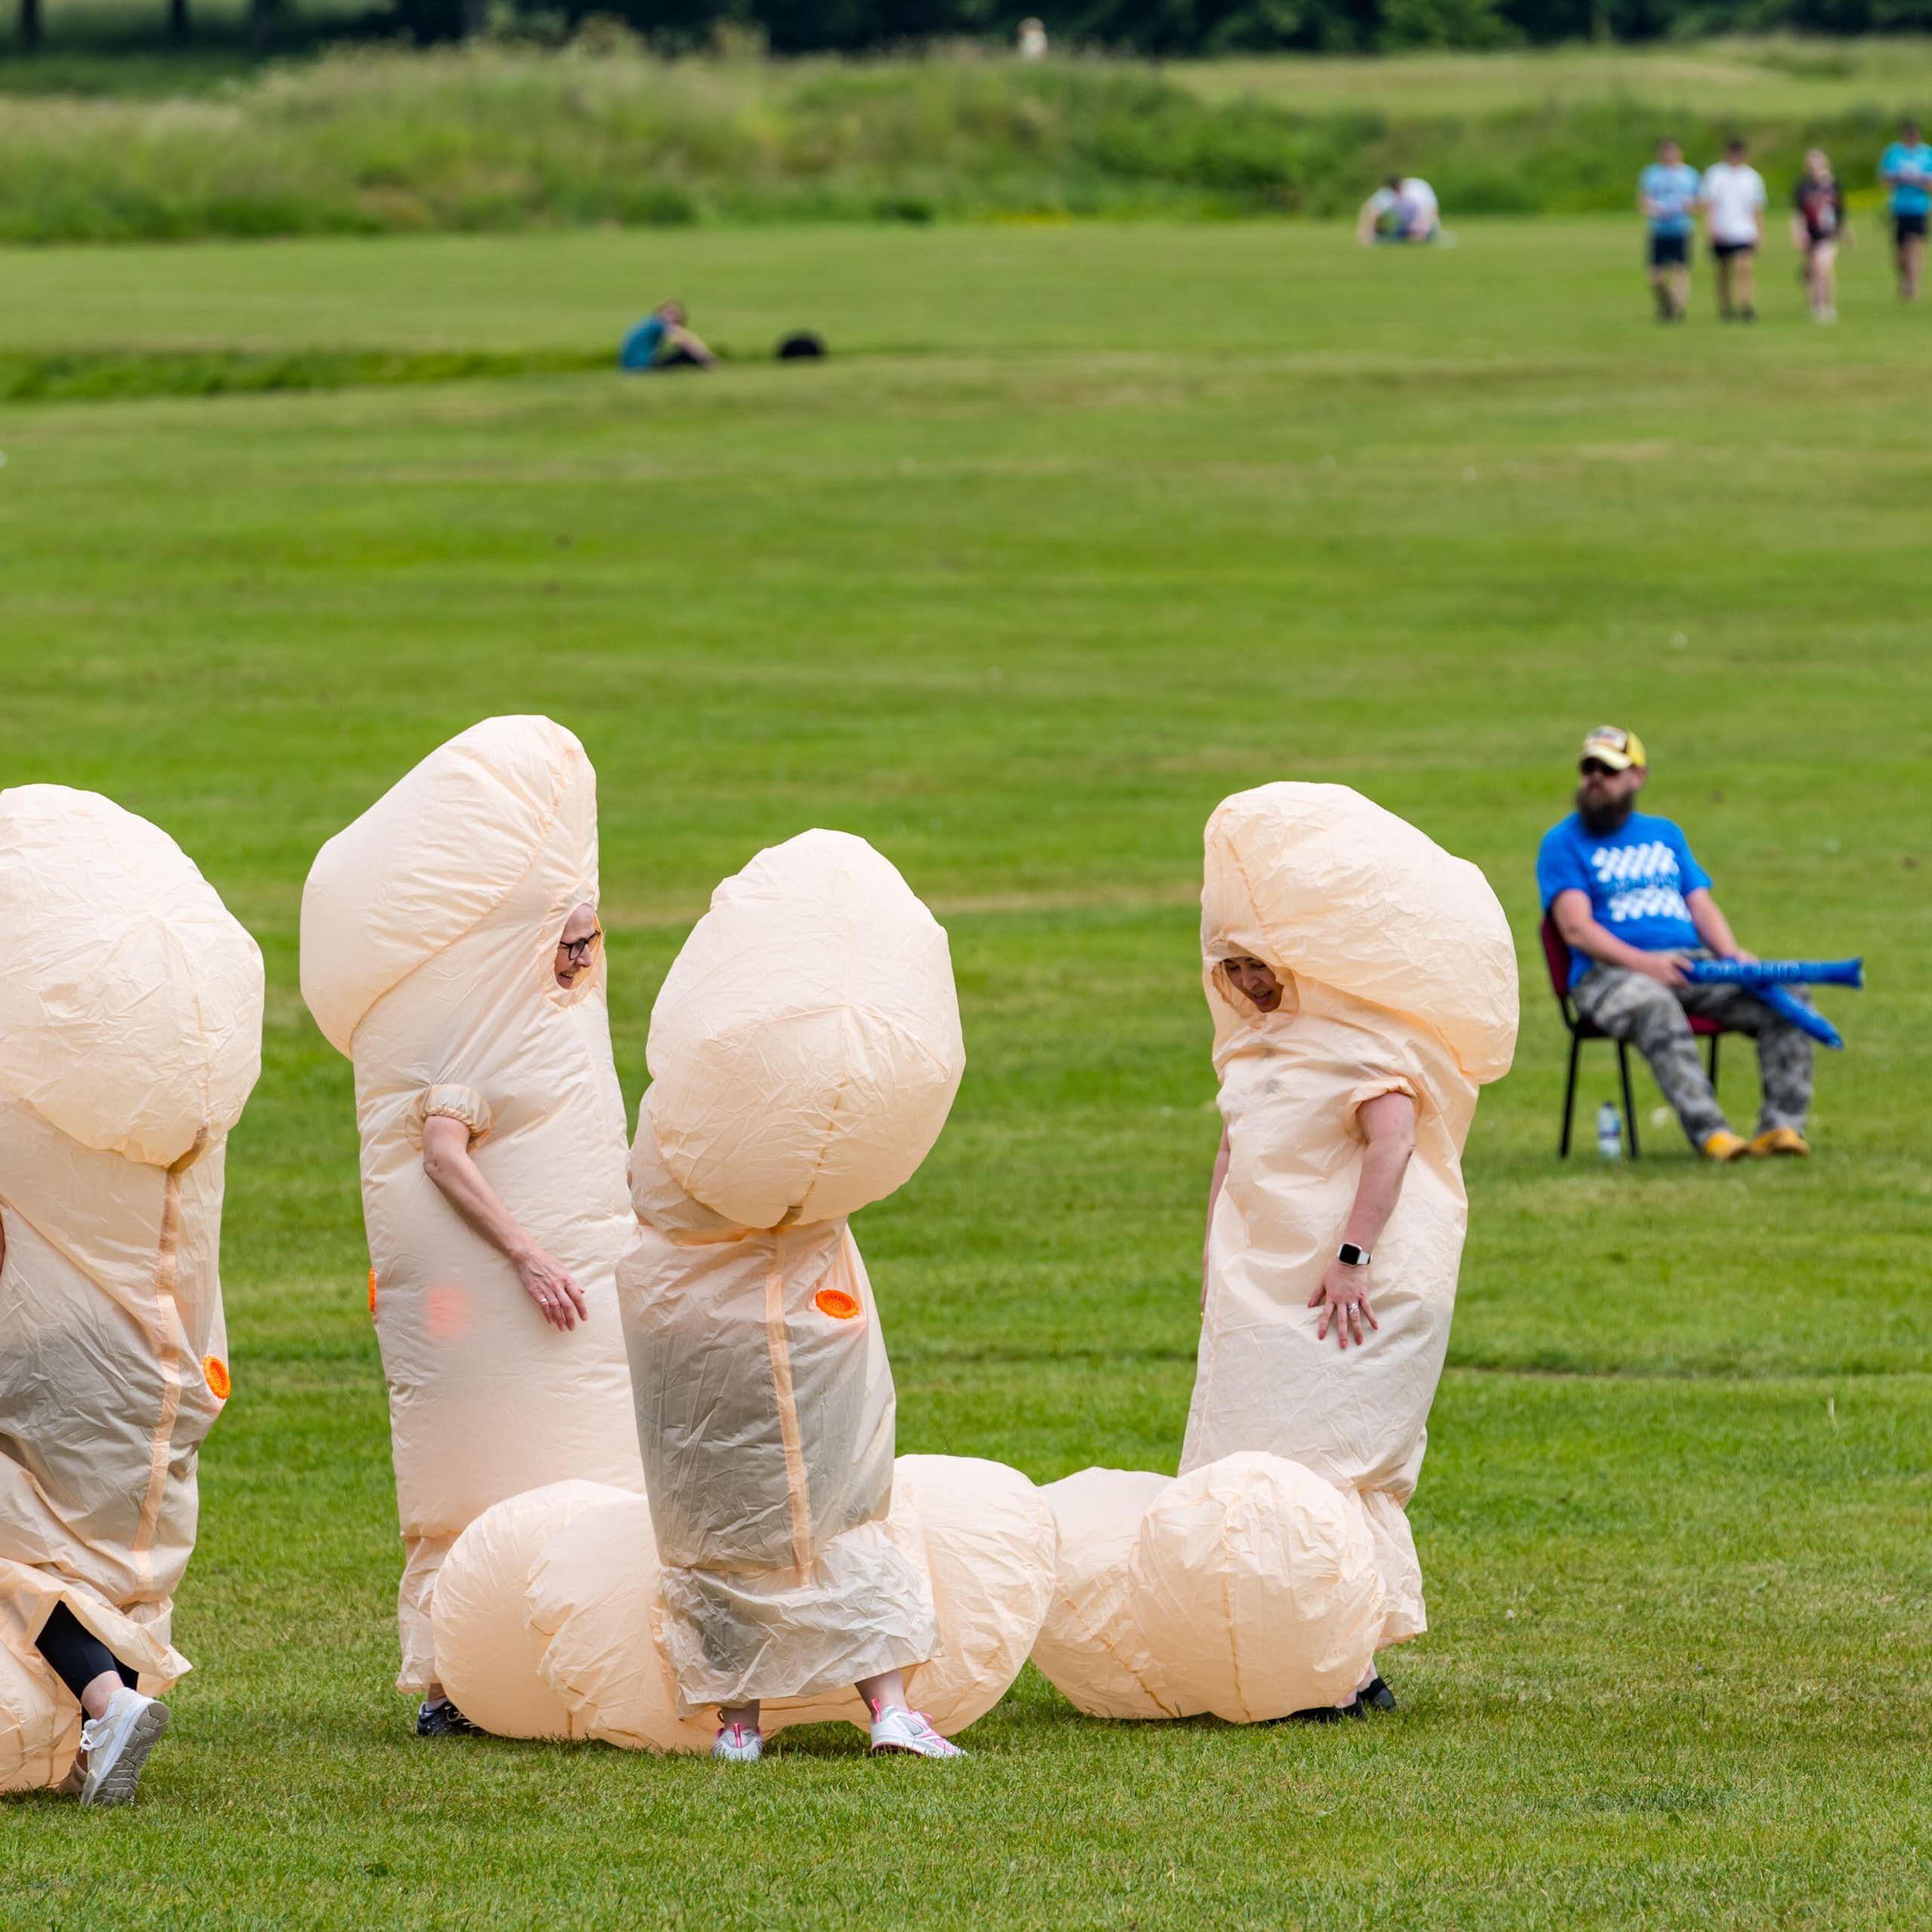 People dressed in penis costumes for a cancer fundraised in Scotland